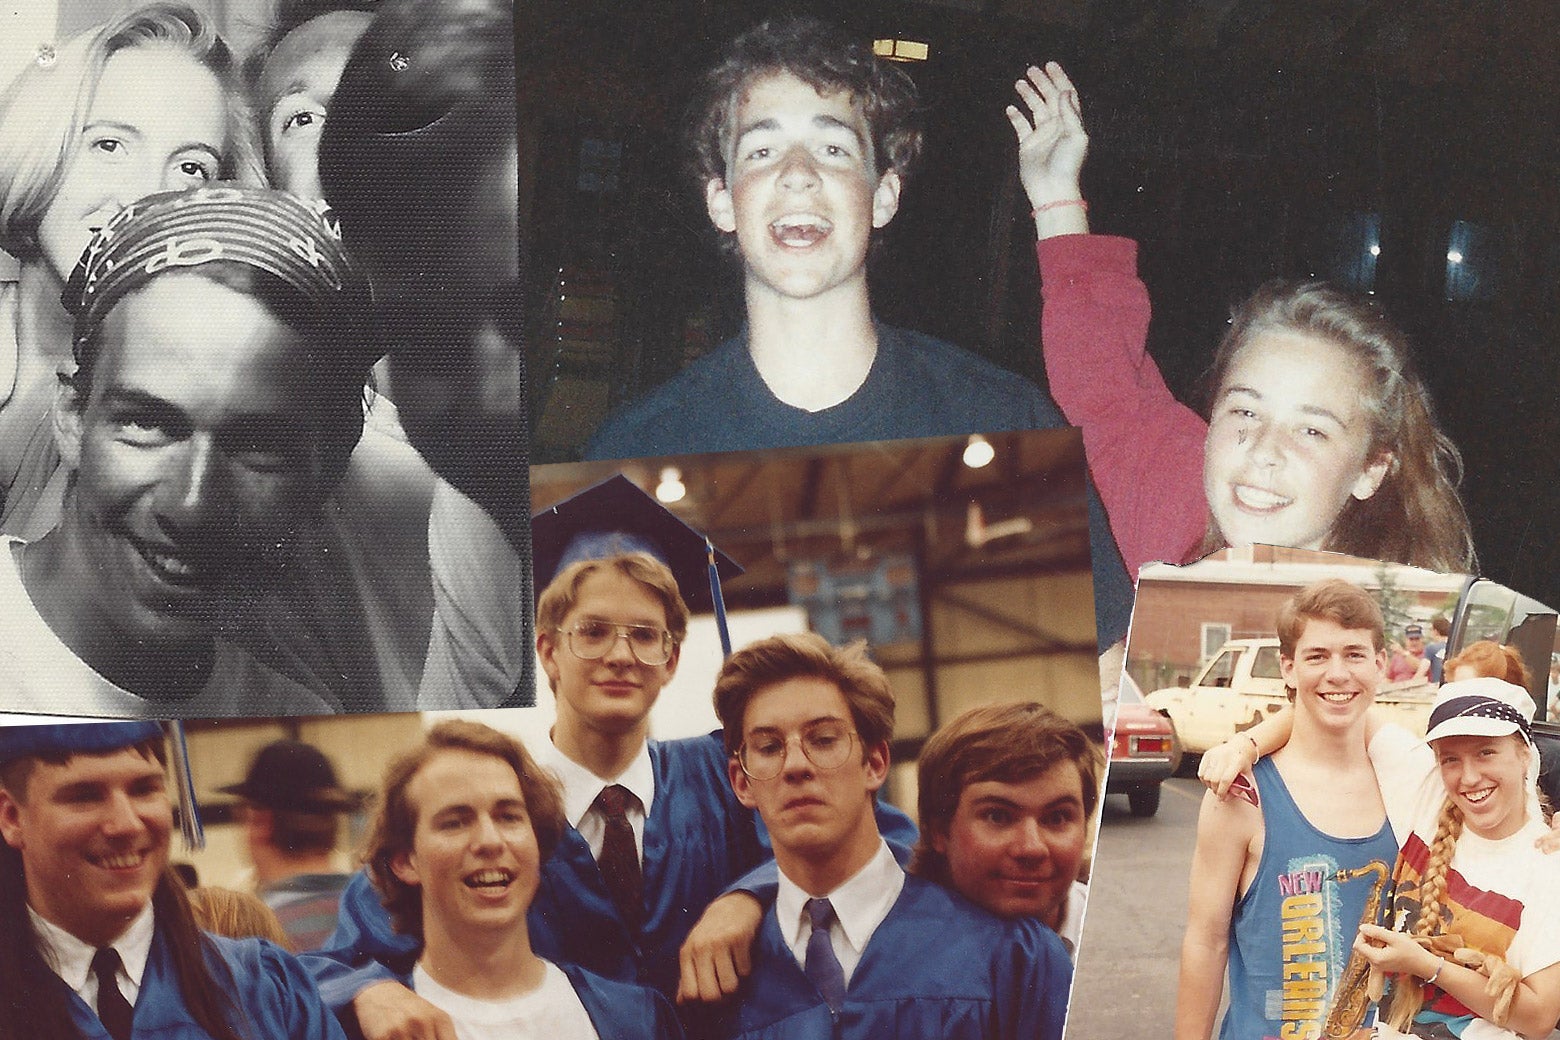 A collage of photos of a youthful Dan Kois surrounded by friends aplenty.